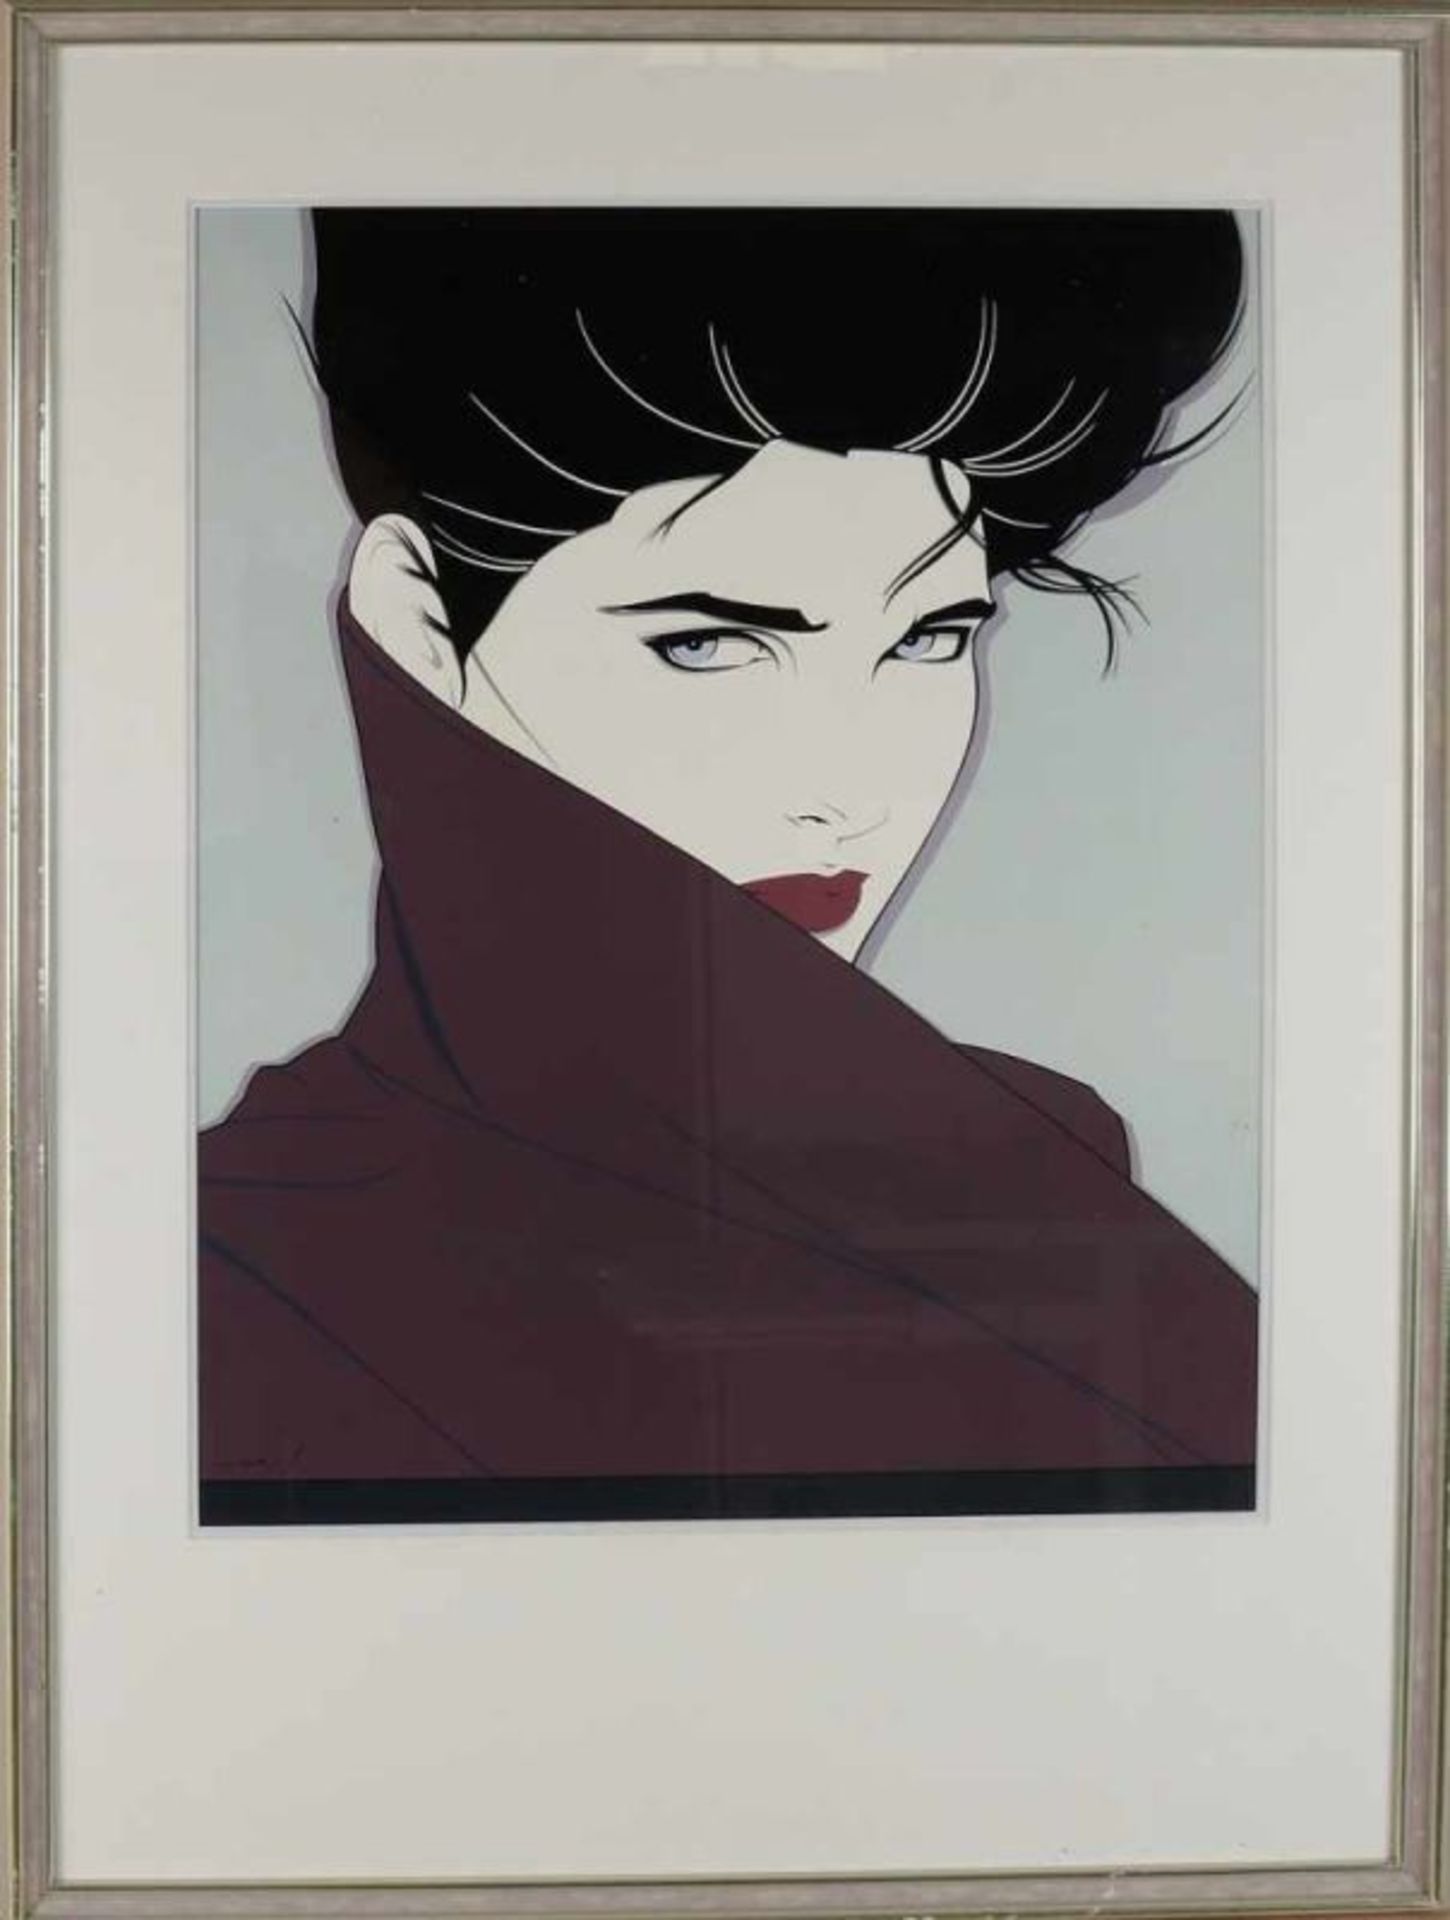 Patrick Nagel. 1945 - 1984 U.S.A. Lady with raincoat. Lithograph on paper. Size: 68 x H, B 55 cm. In